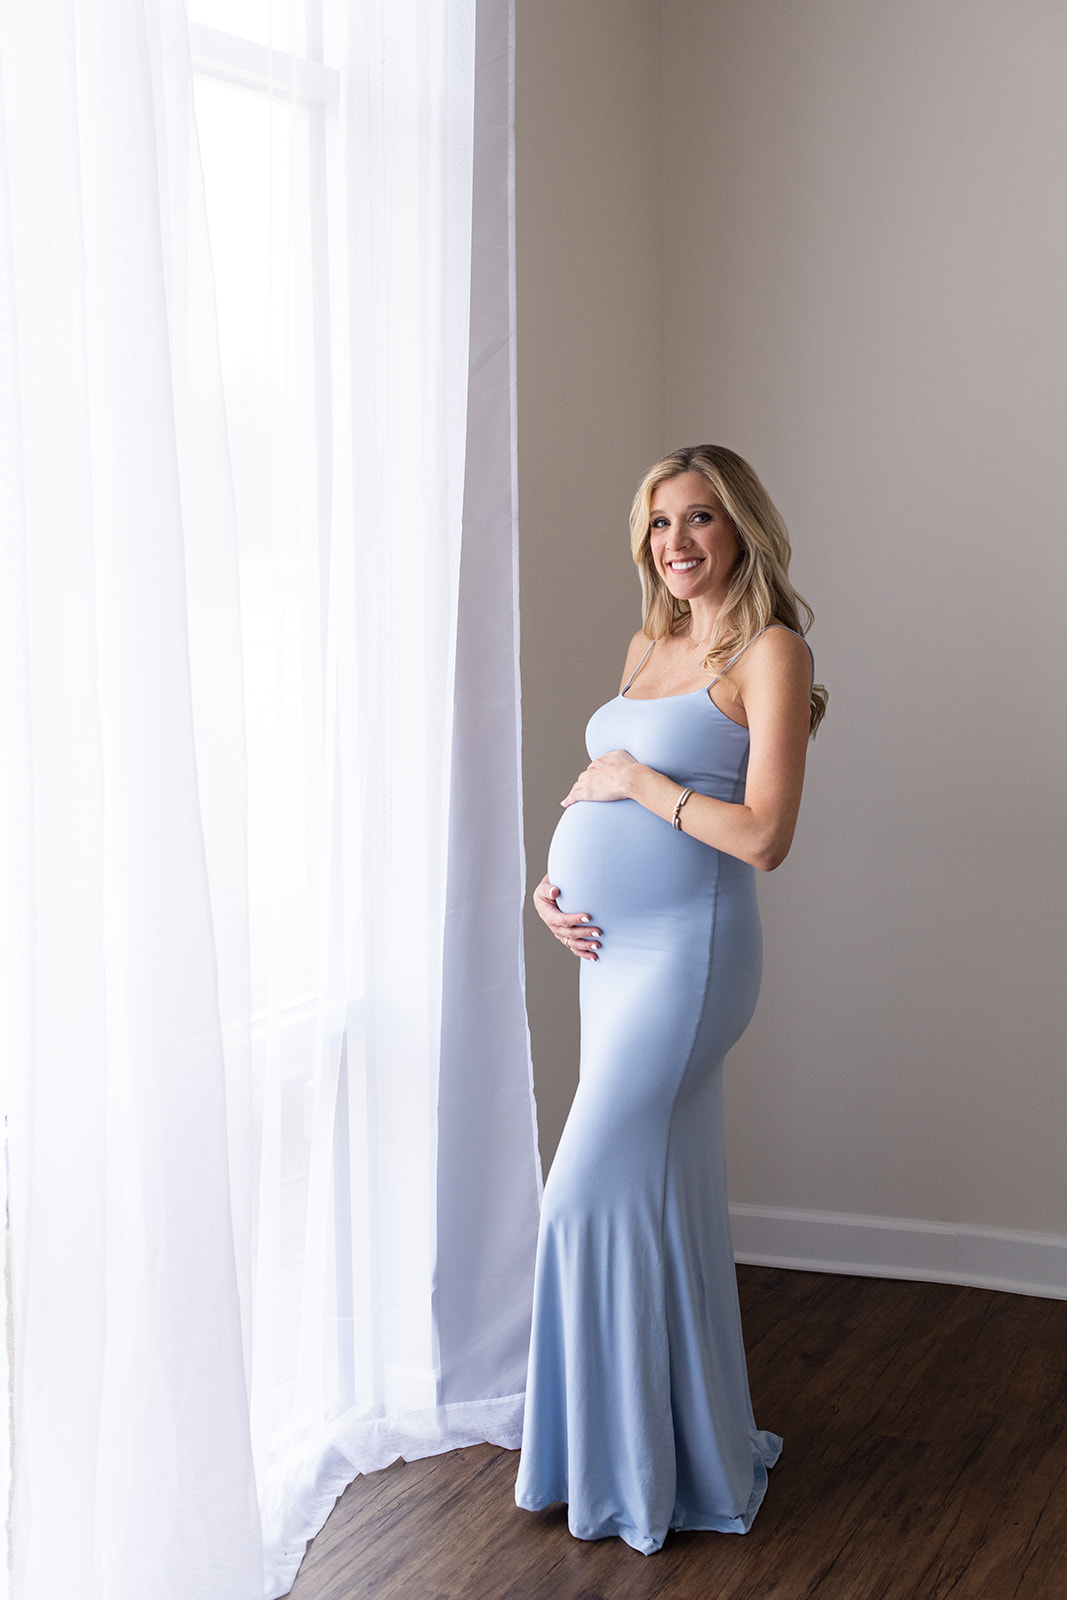 Mom to be stands next to a big window wearing a baby blue maternity dress